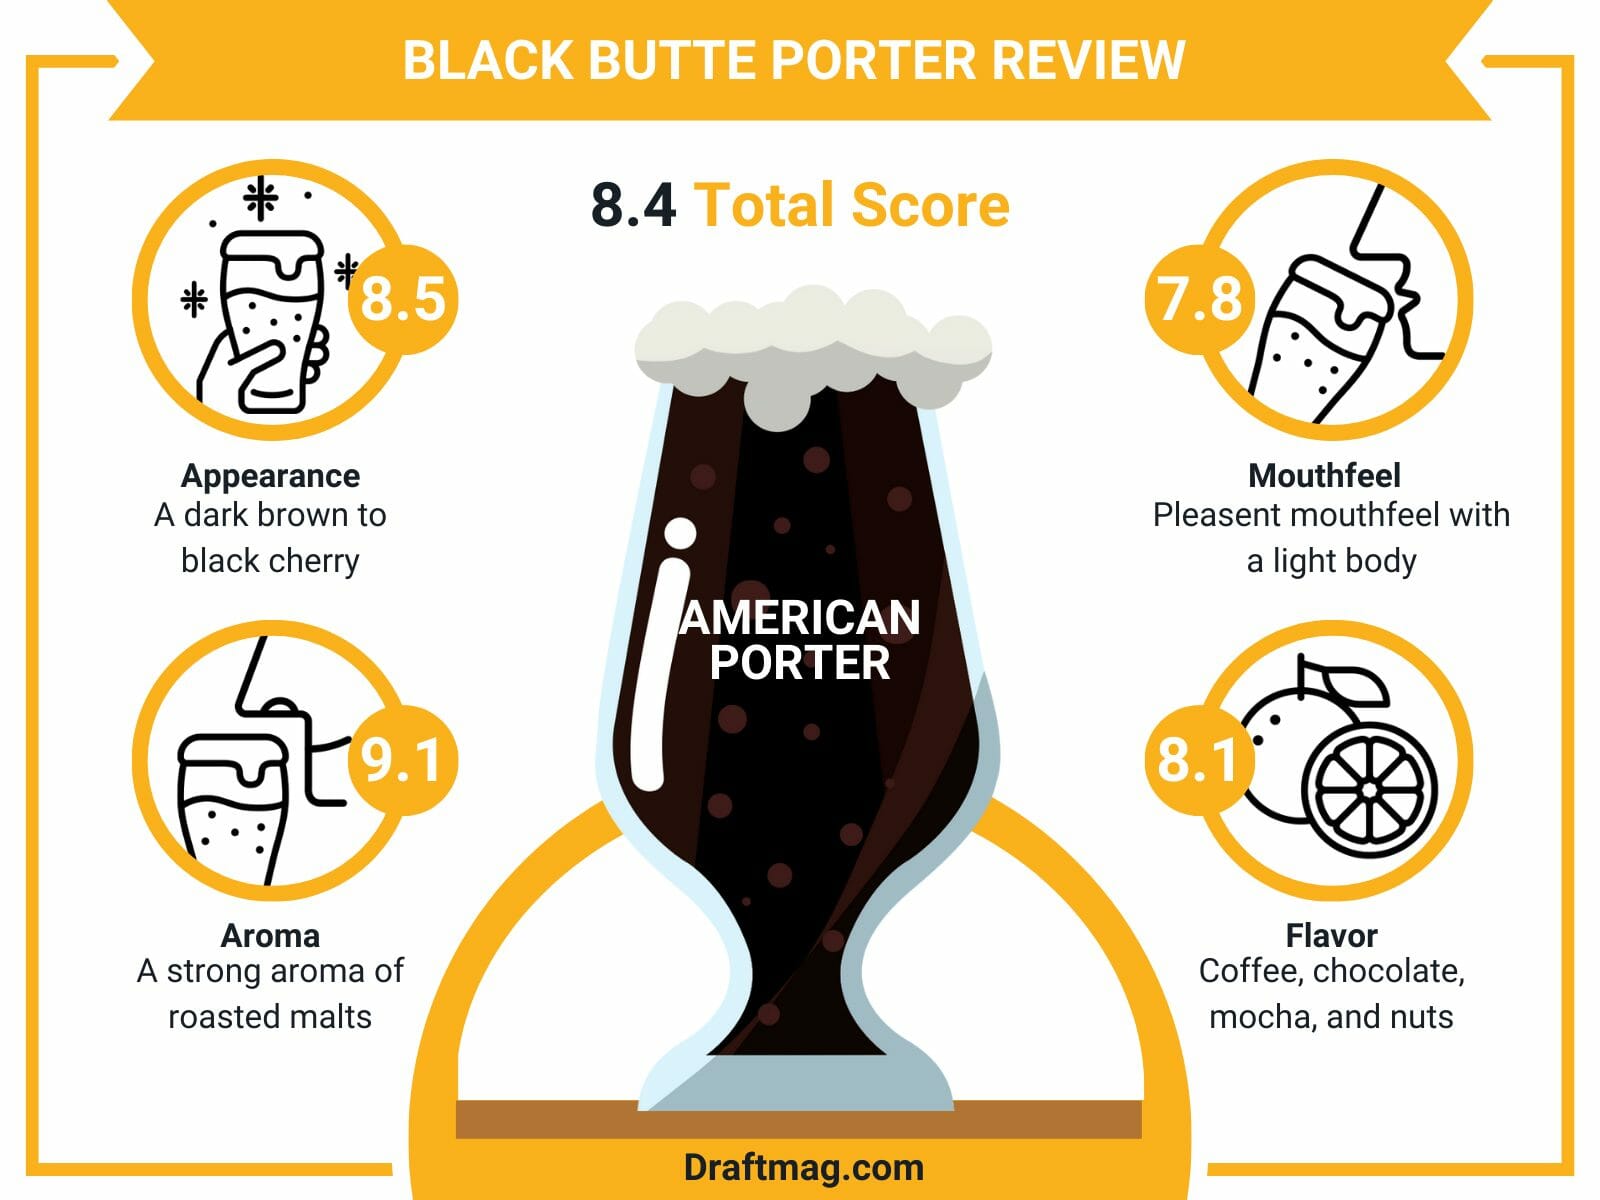 Black butte porter review infographic